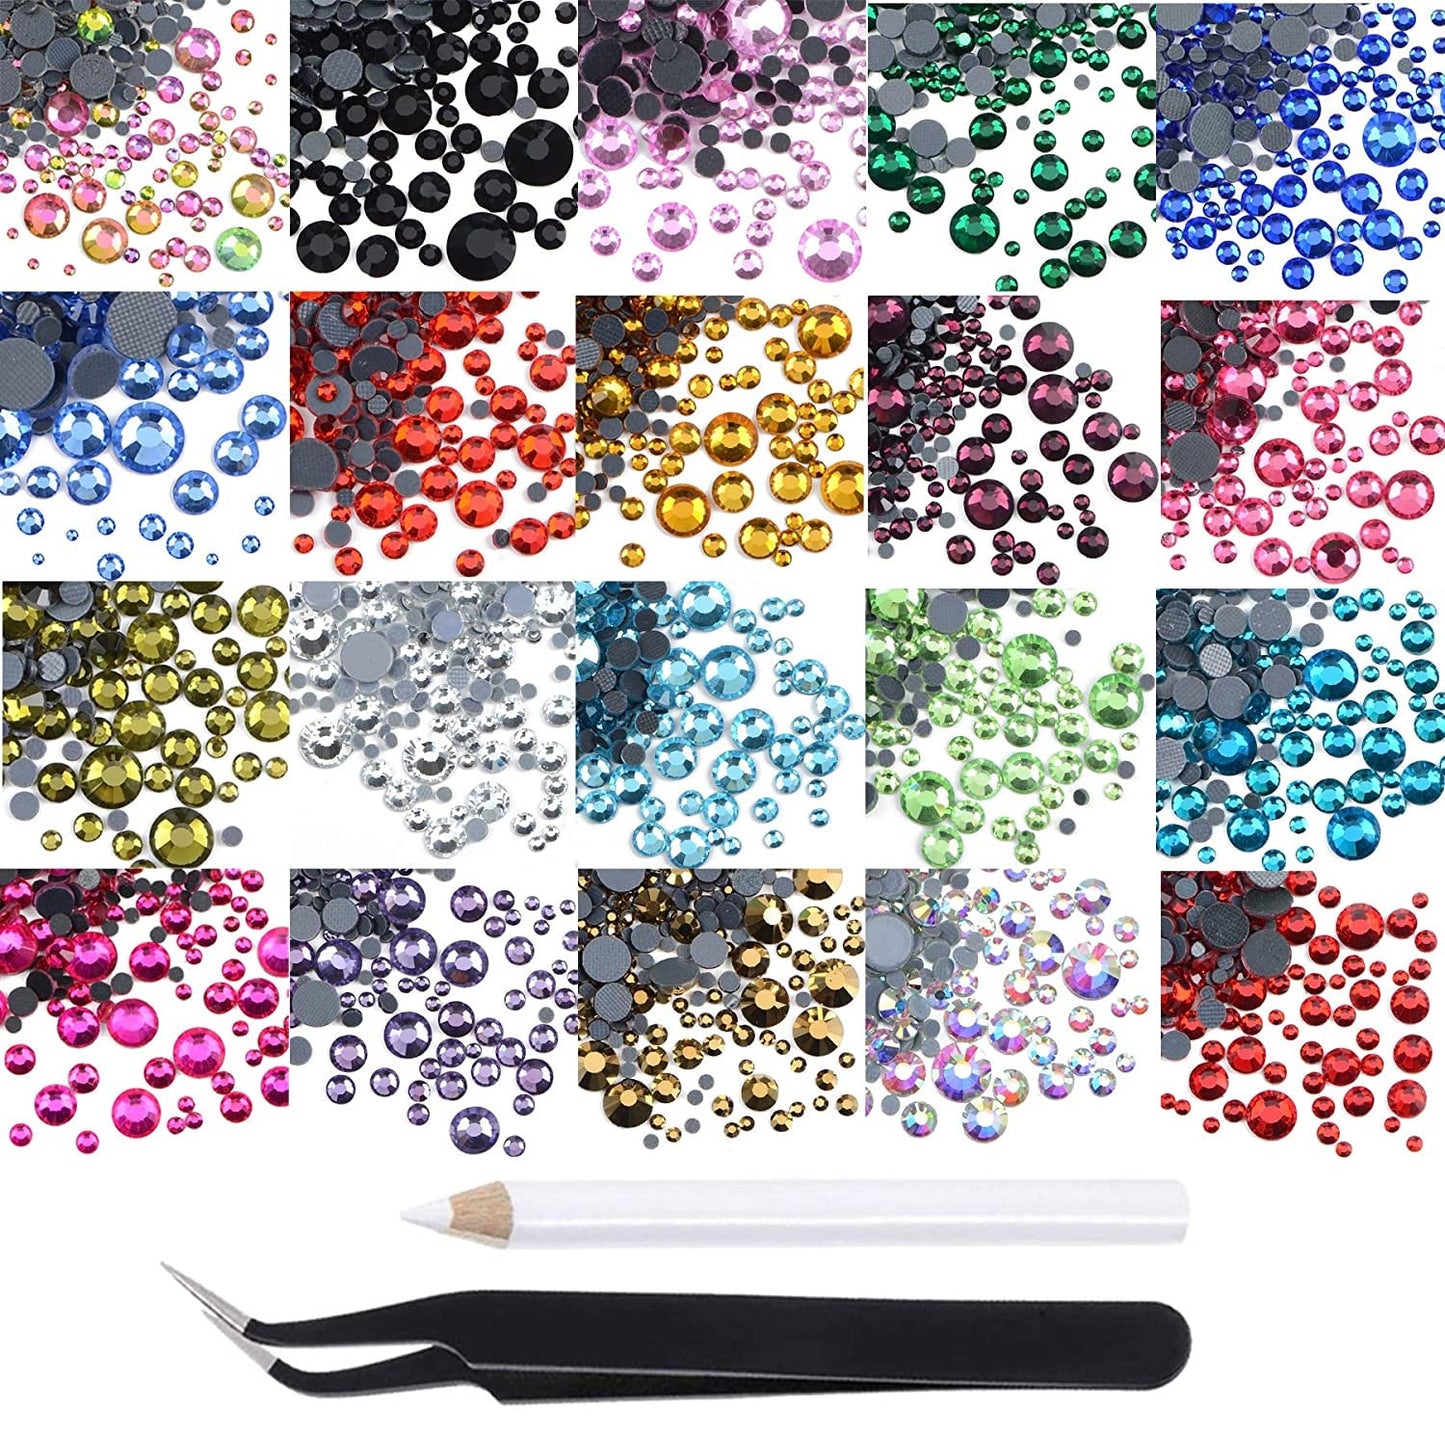 Hot fix Rhinestone Kit - Over 6800 Crystals - ss6 ss10 ss16 ss20 ss30 hot fix rhinestones